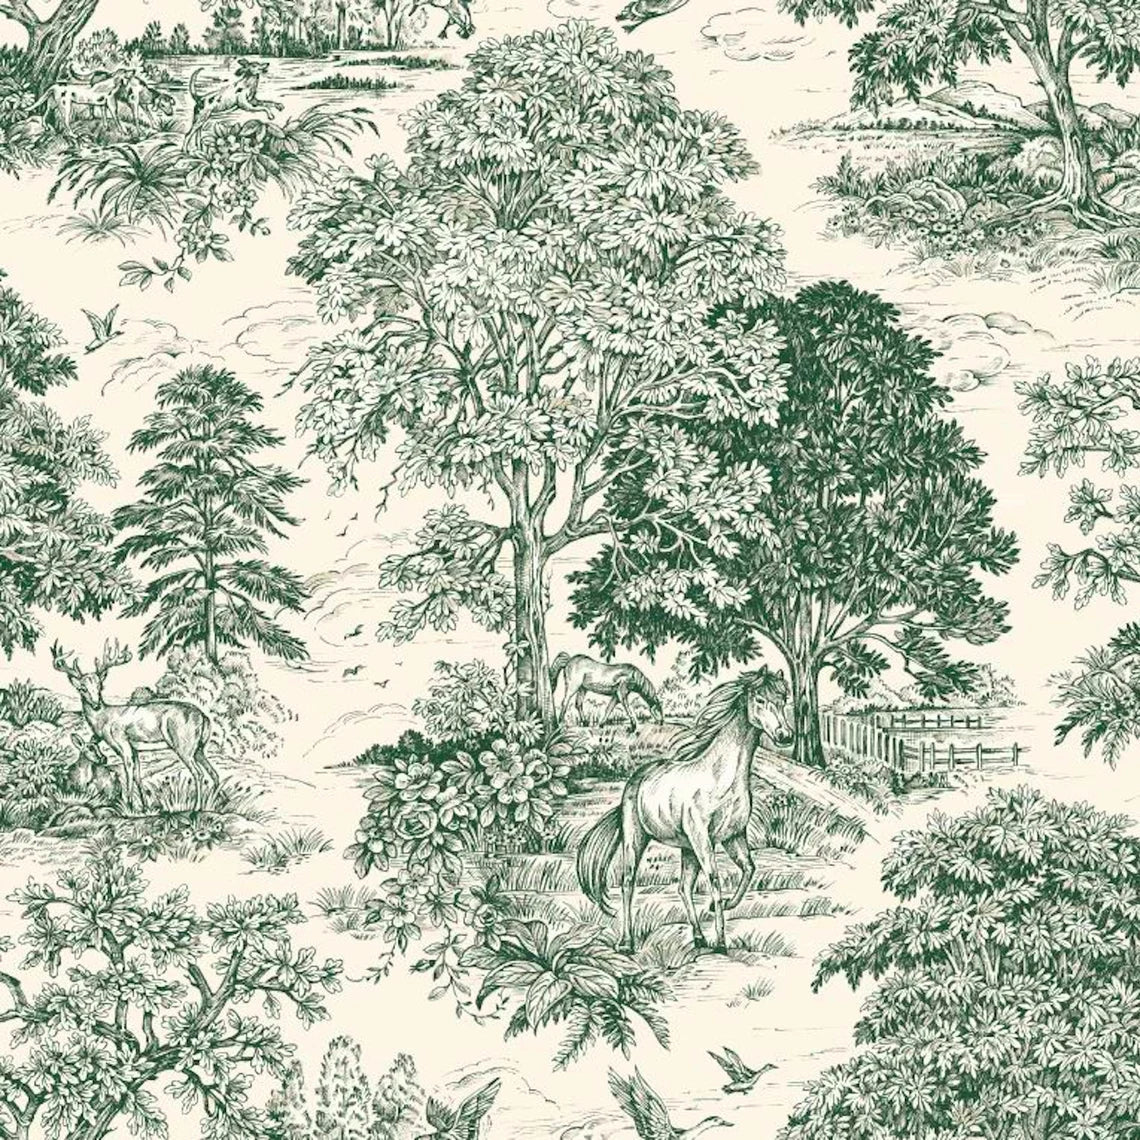 duvet cover in Yellowstone Classic Green Country Toile- Horses, Deer, Dogs- Large Scale